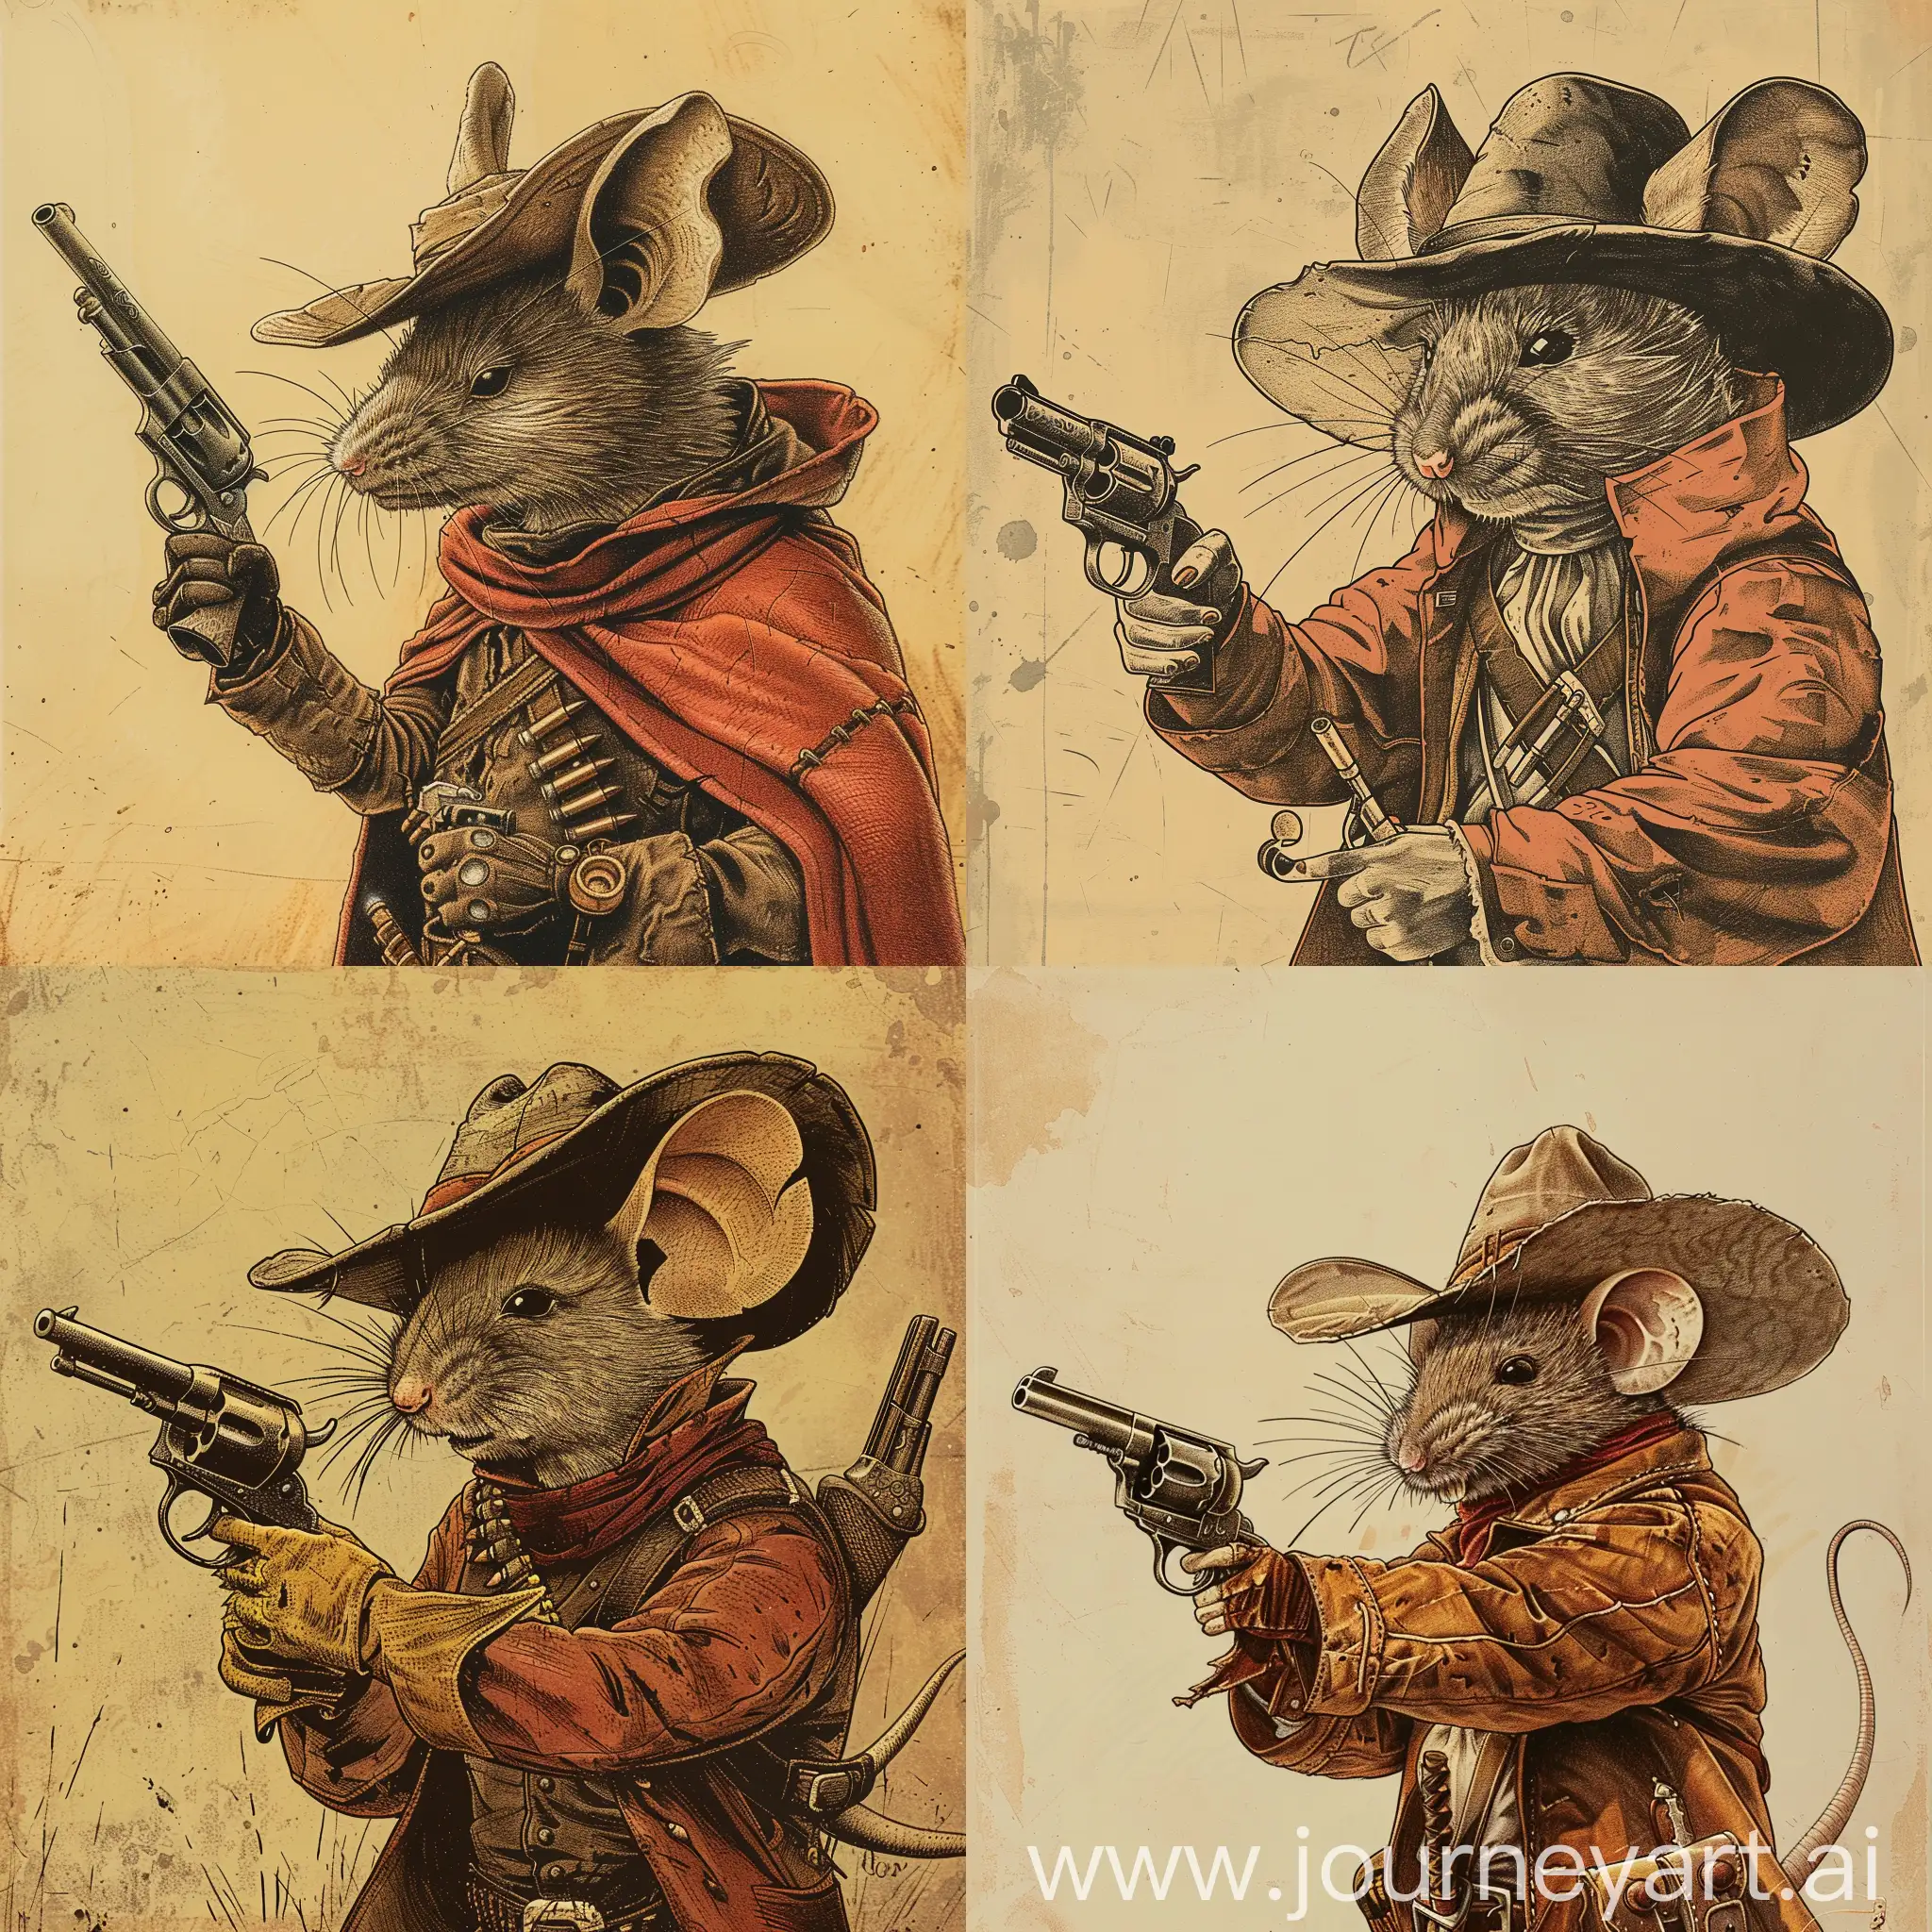 1970's dark fantasy book cover paper art dungeons and dragons style drawing of a mouse in gunslinger attire holding a revolver